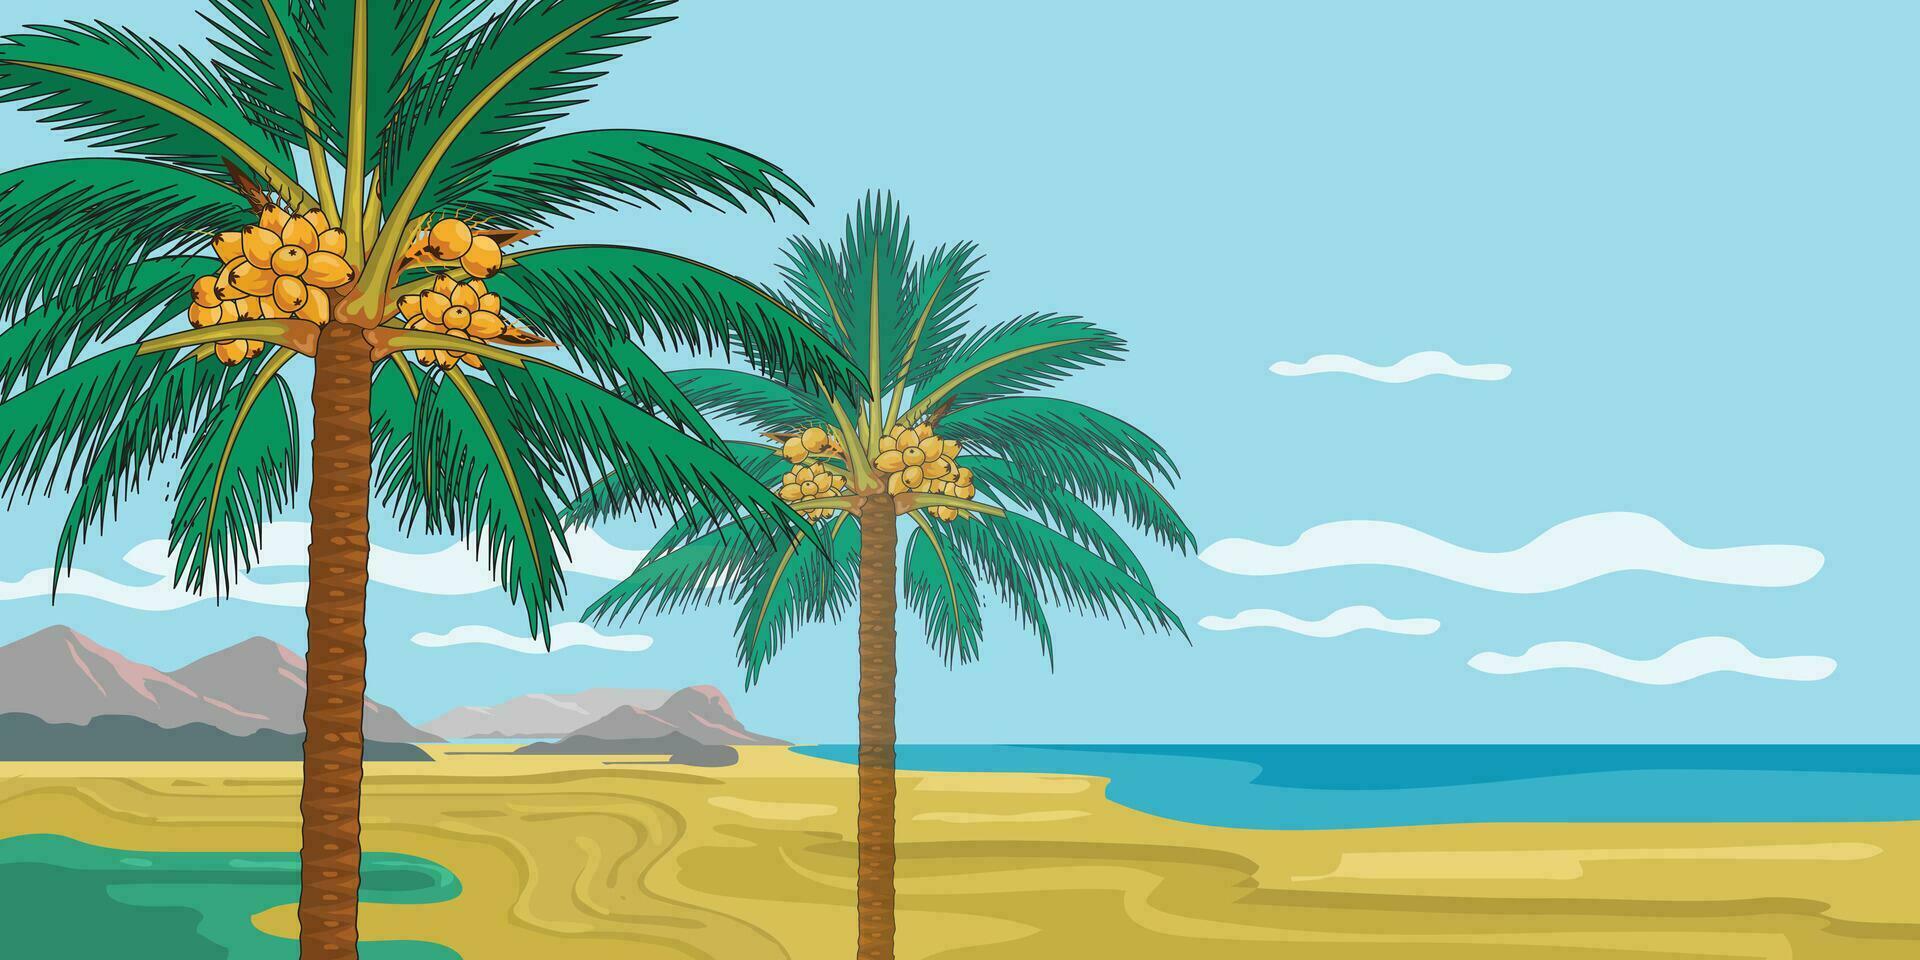 coconut trees in green color leaves beach blue background for background design. vector